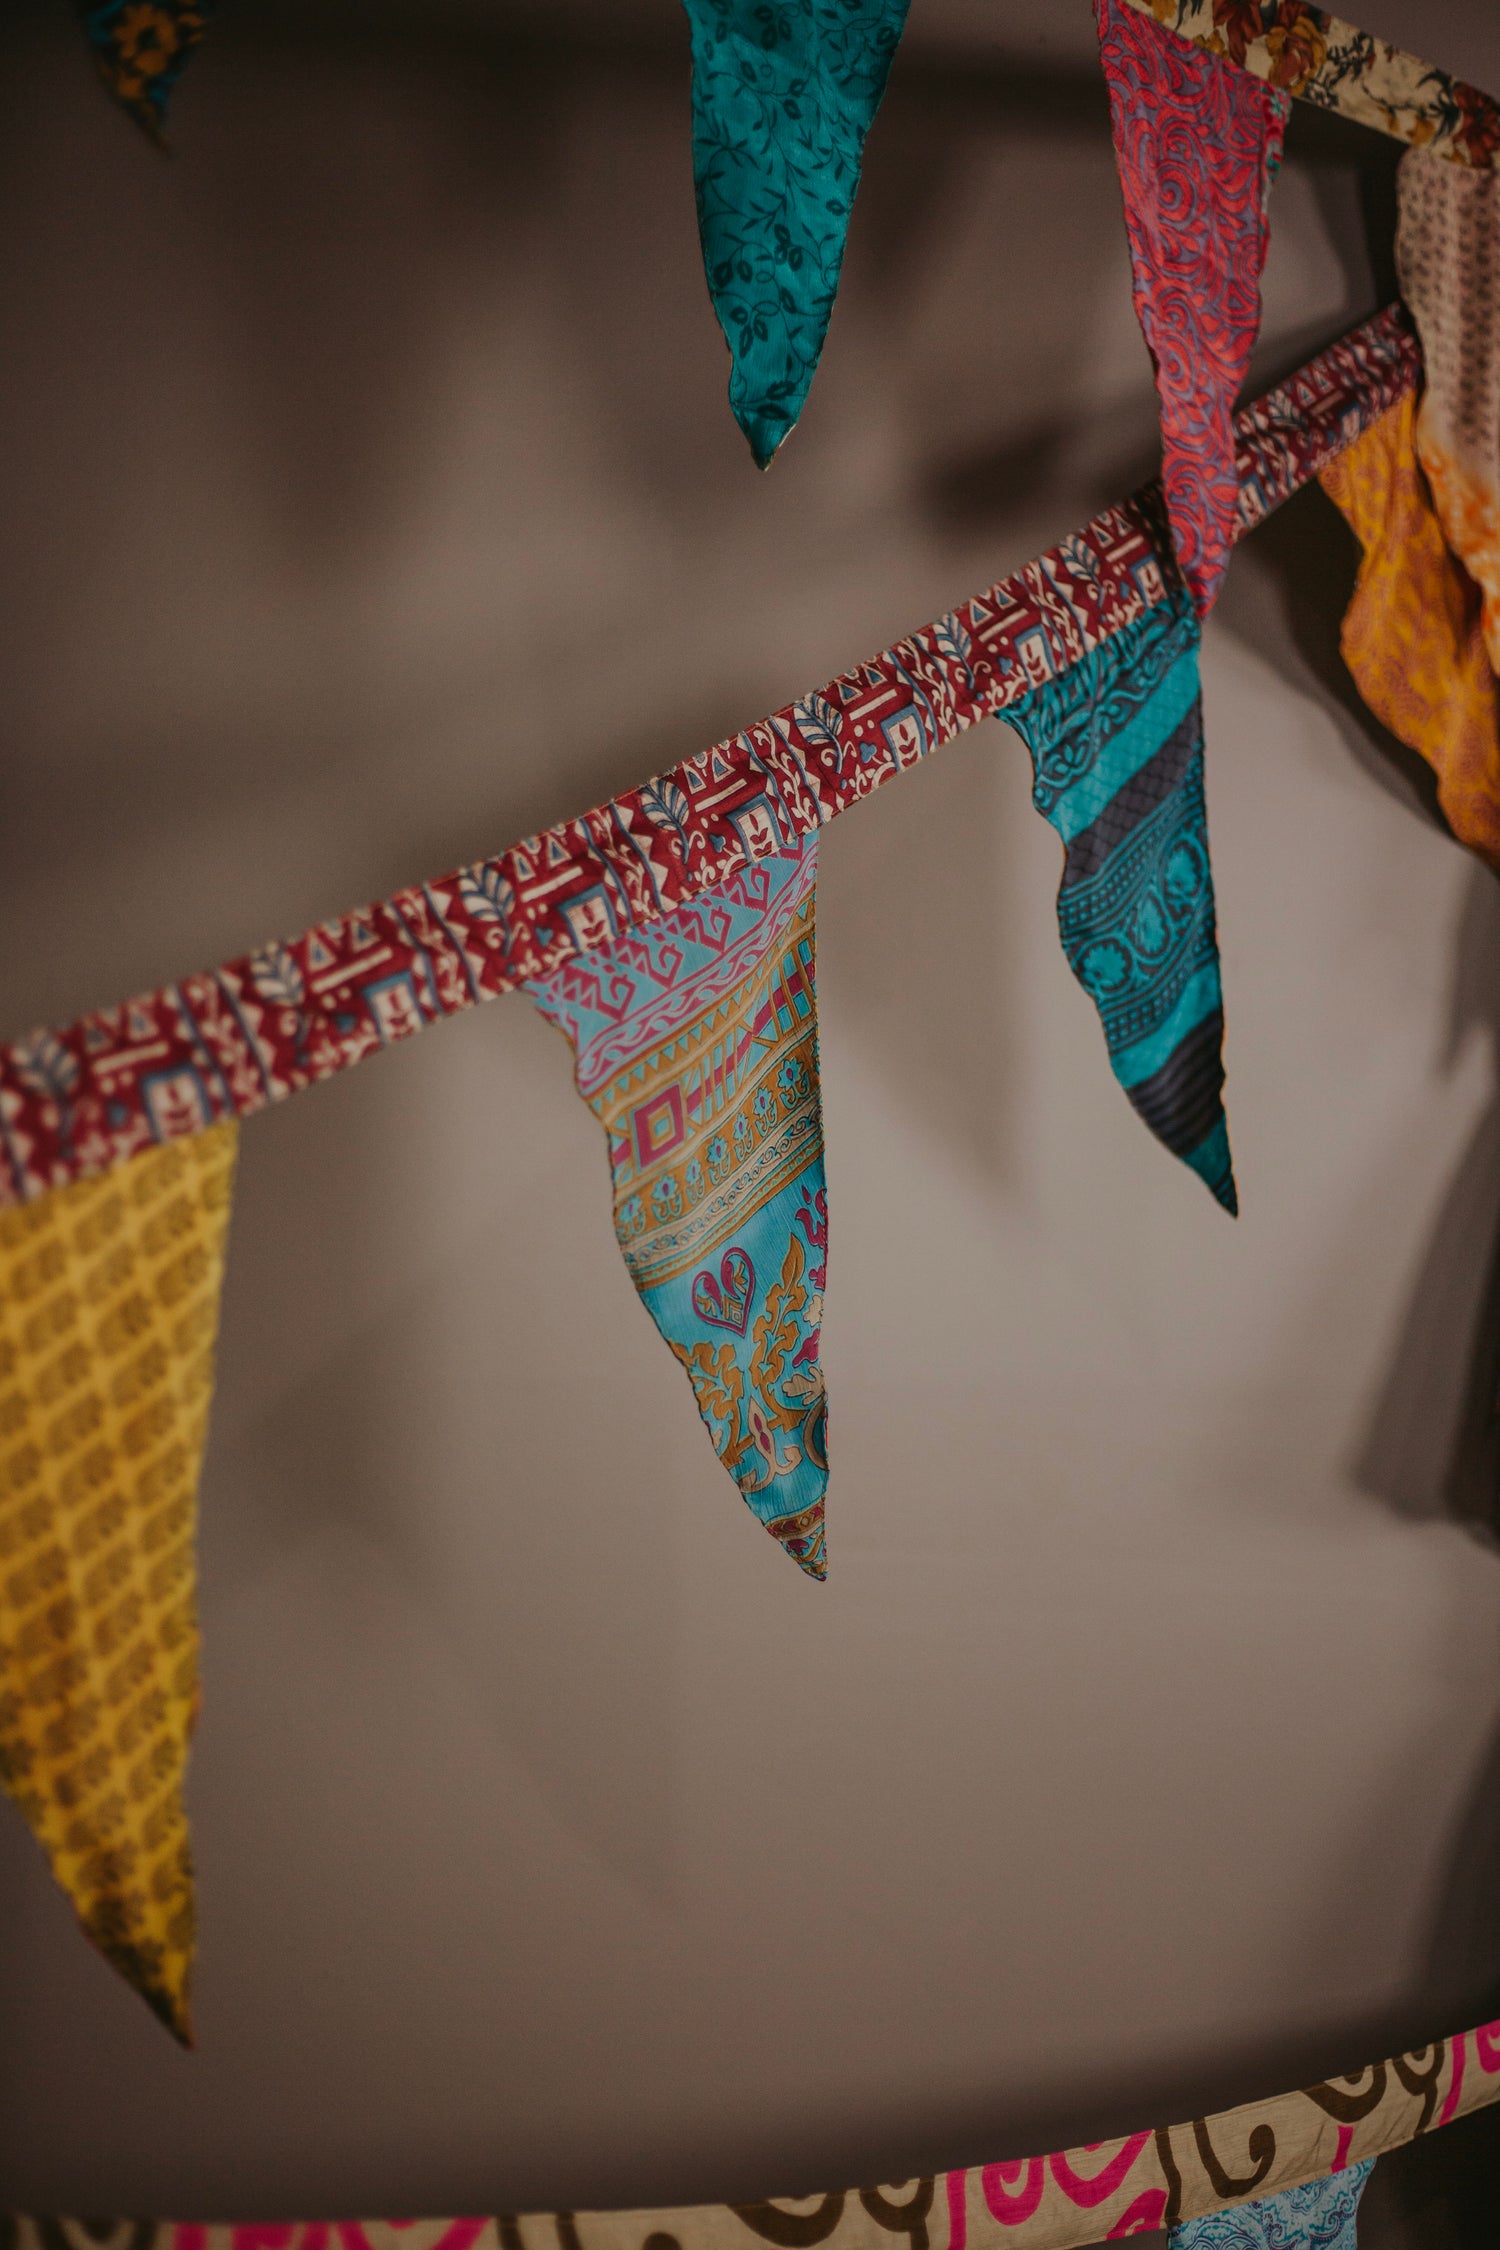 Multi-colored up-cycled sari bunting banner